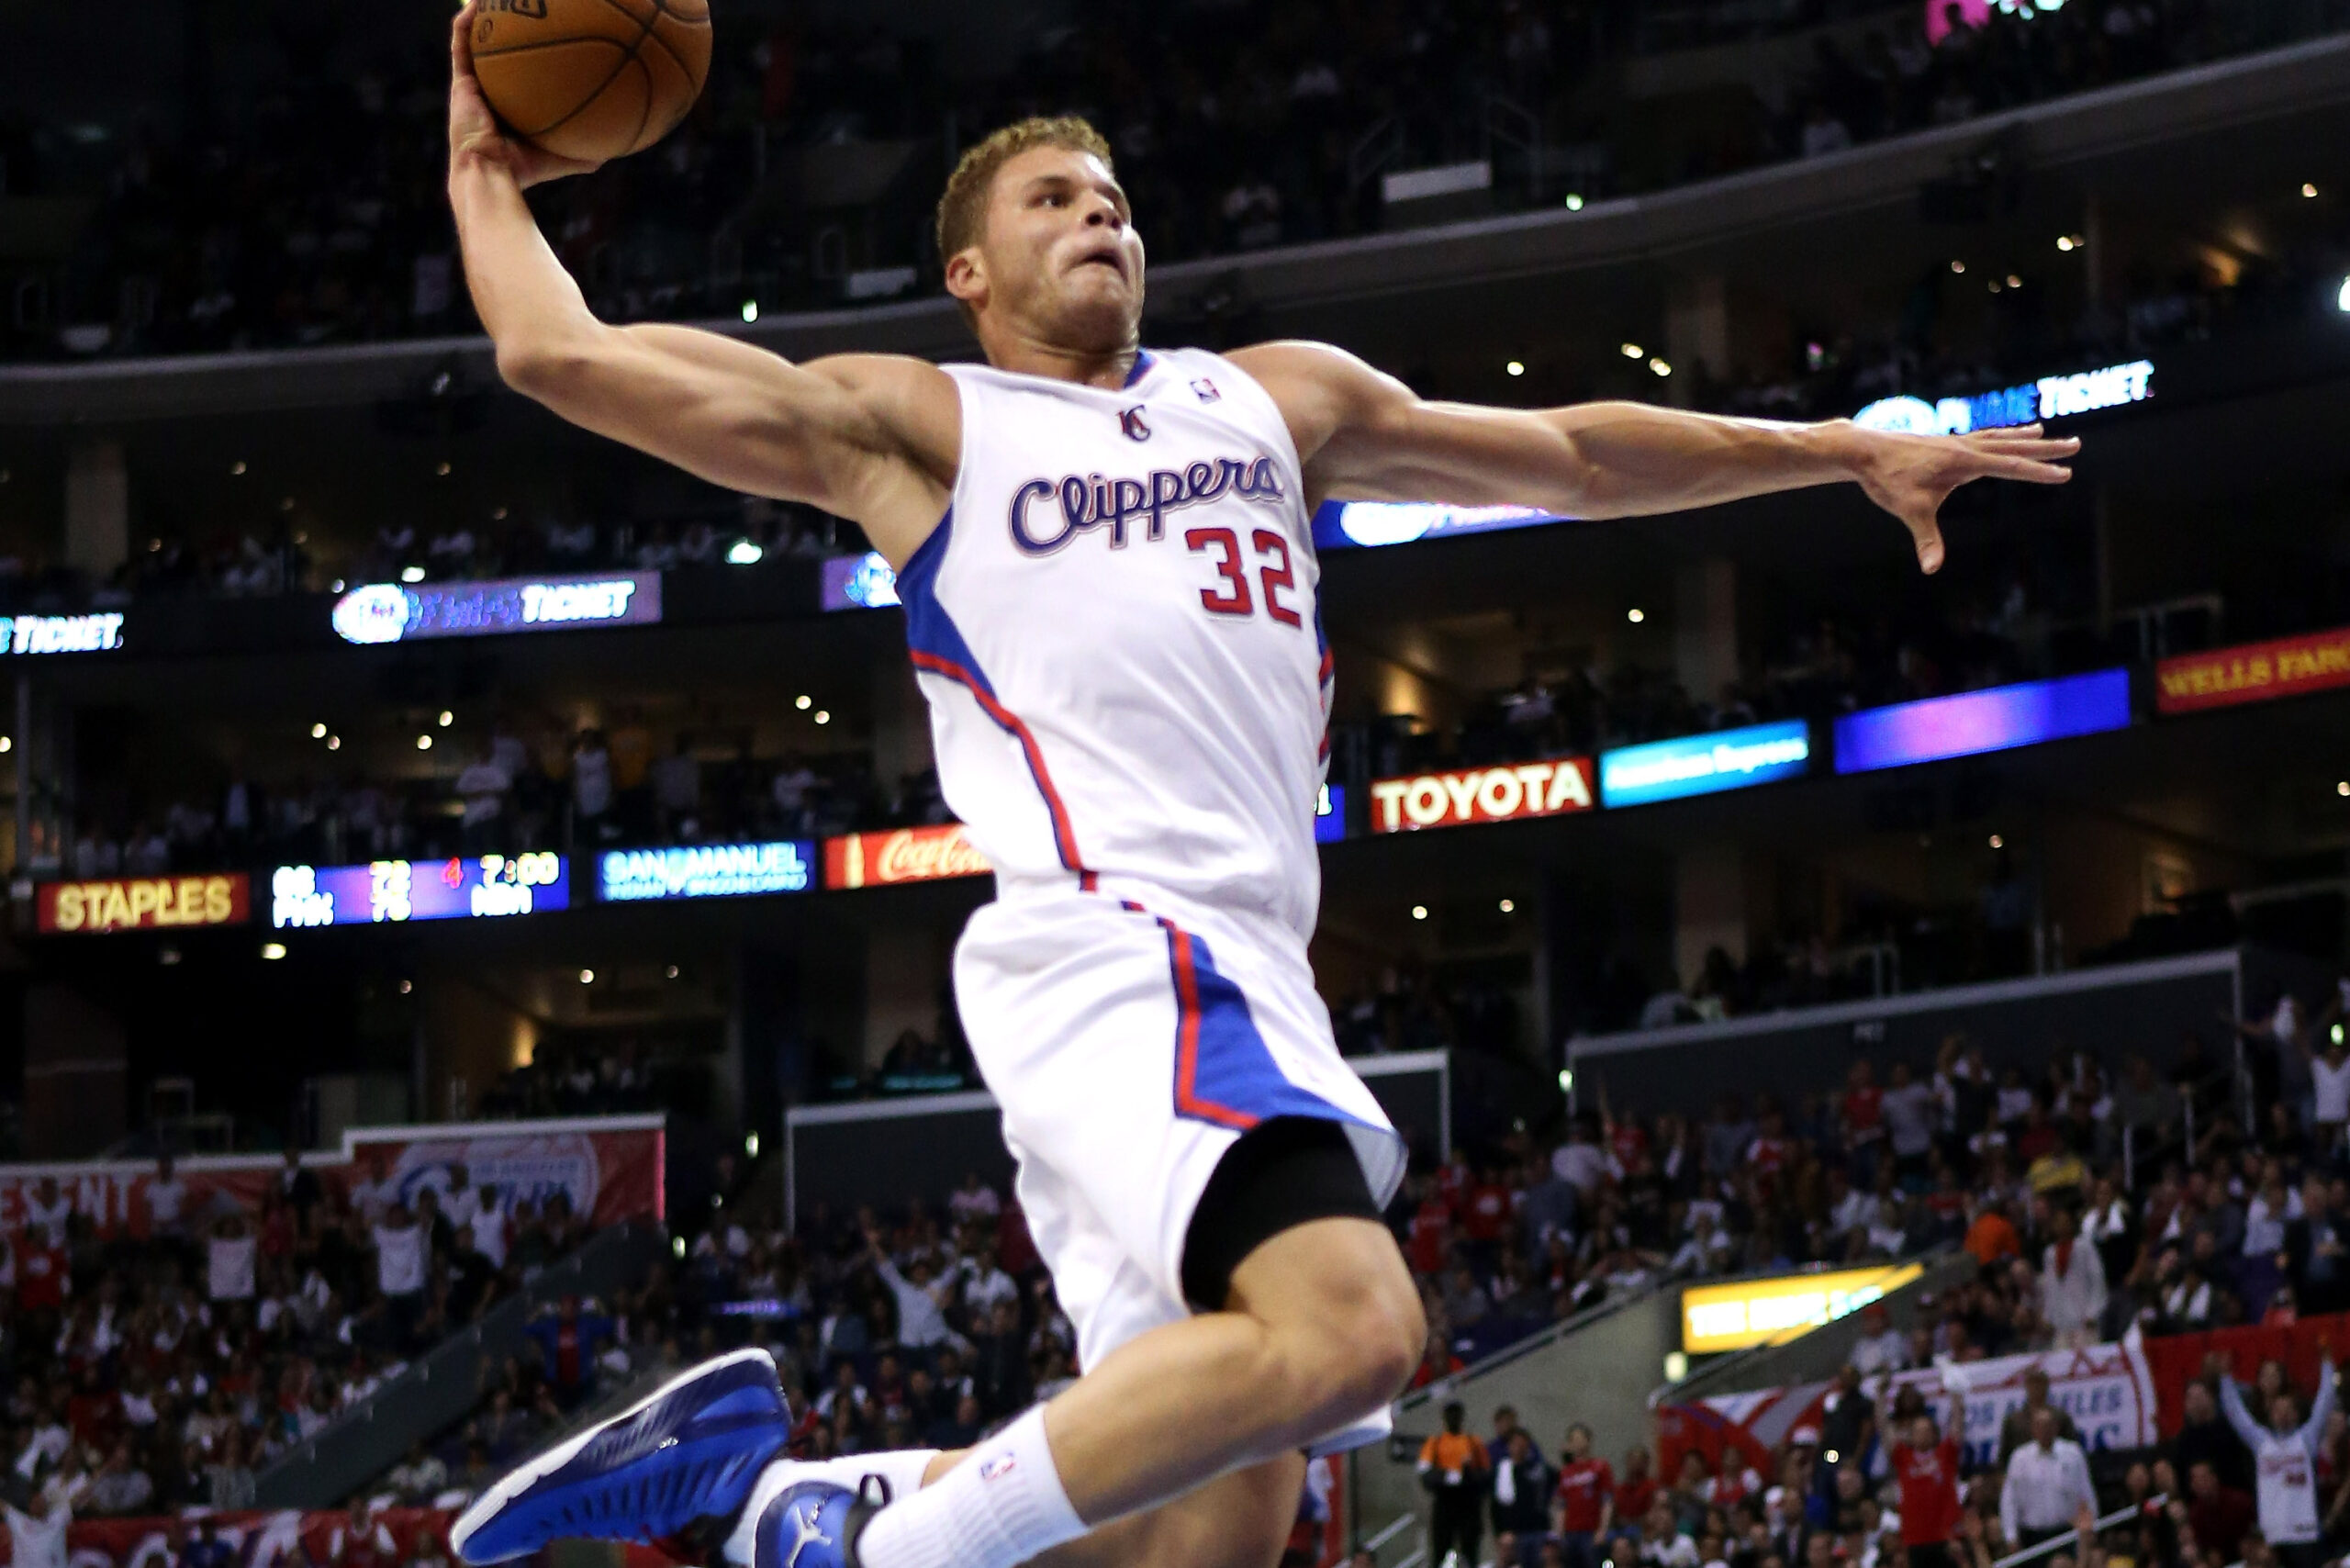 NBA News: At Only Age 34, Is the End Near for Blake Griffin? Frustration and Uncertainty Ahead with No Luck in Free Agency Yet